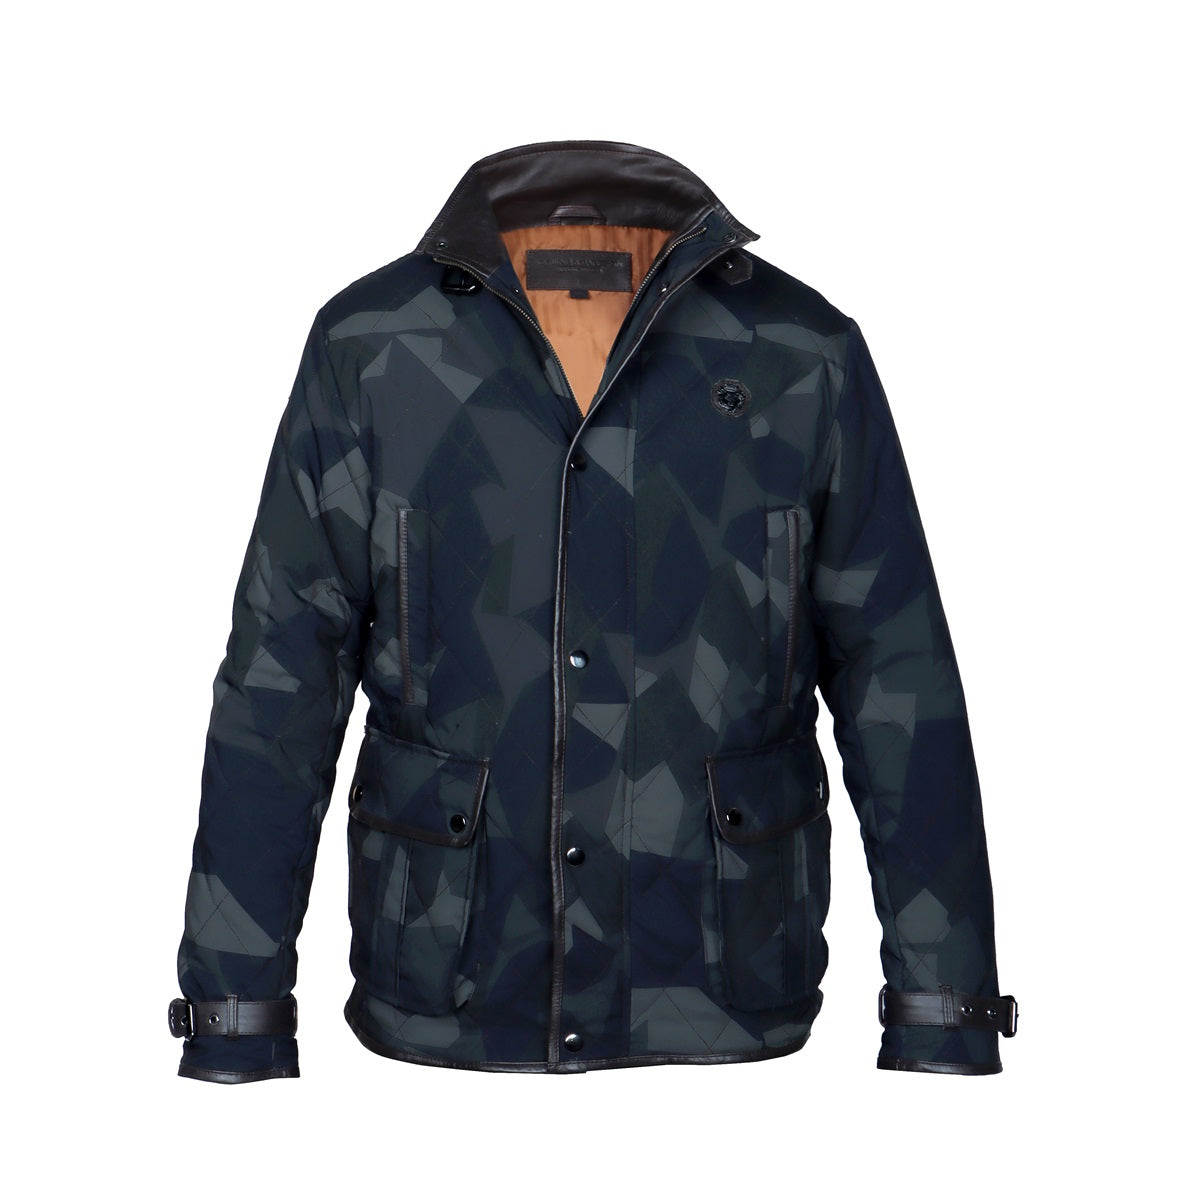 Contrasting Camo Blue Diamond Stitched Button Zip Closure Puffer Jacket For Men By Brune & Bareskin